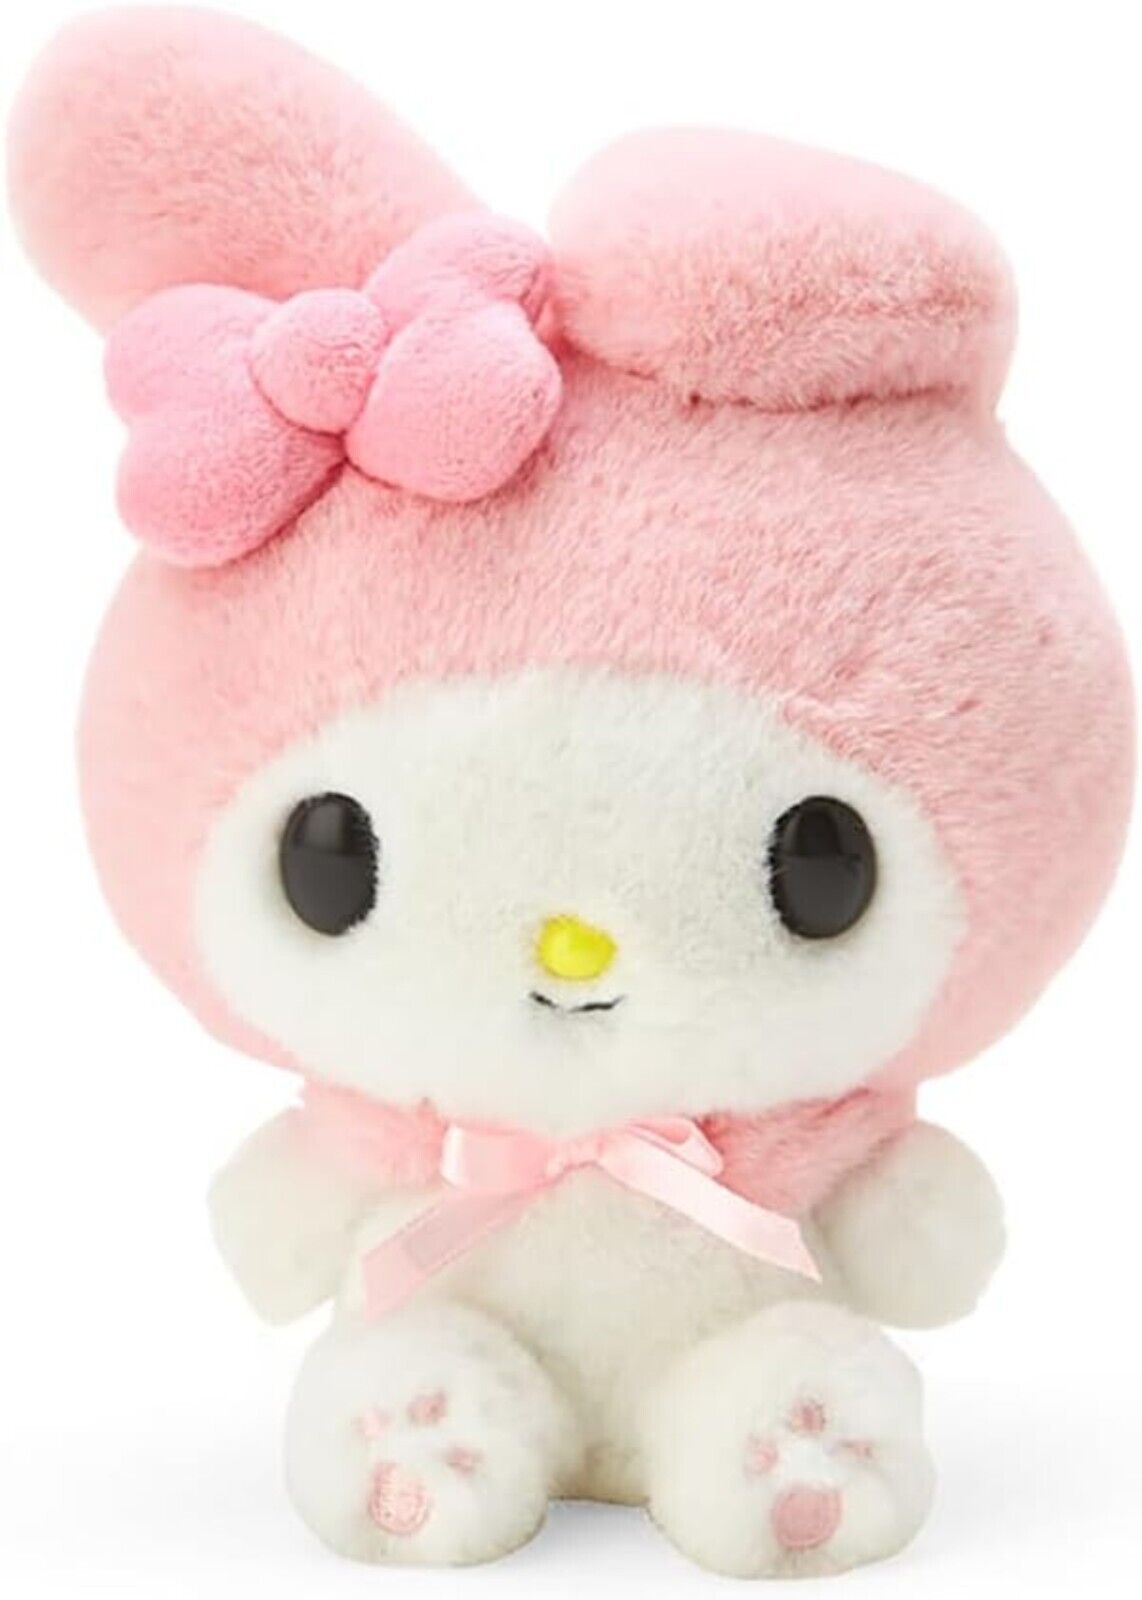 Sanrio Character My Melody Standard Stuffed Toy SS Size Plush Doll New Japan